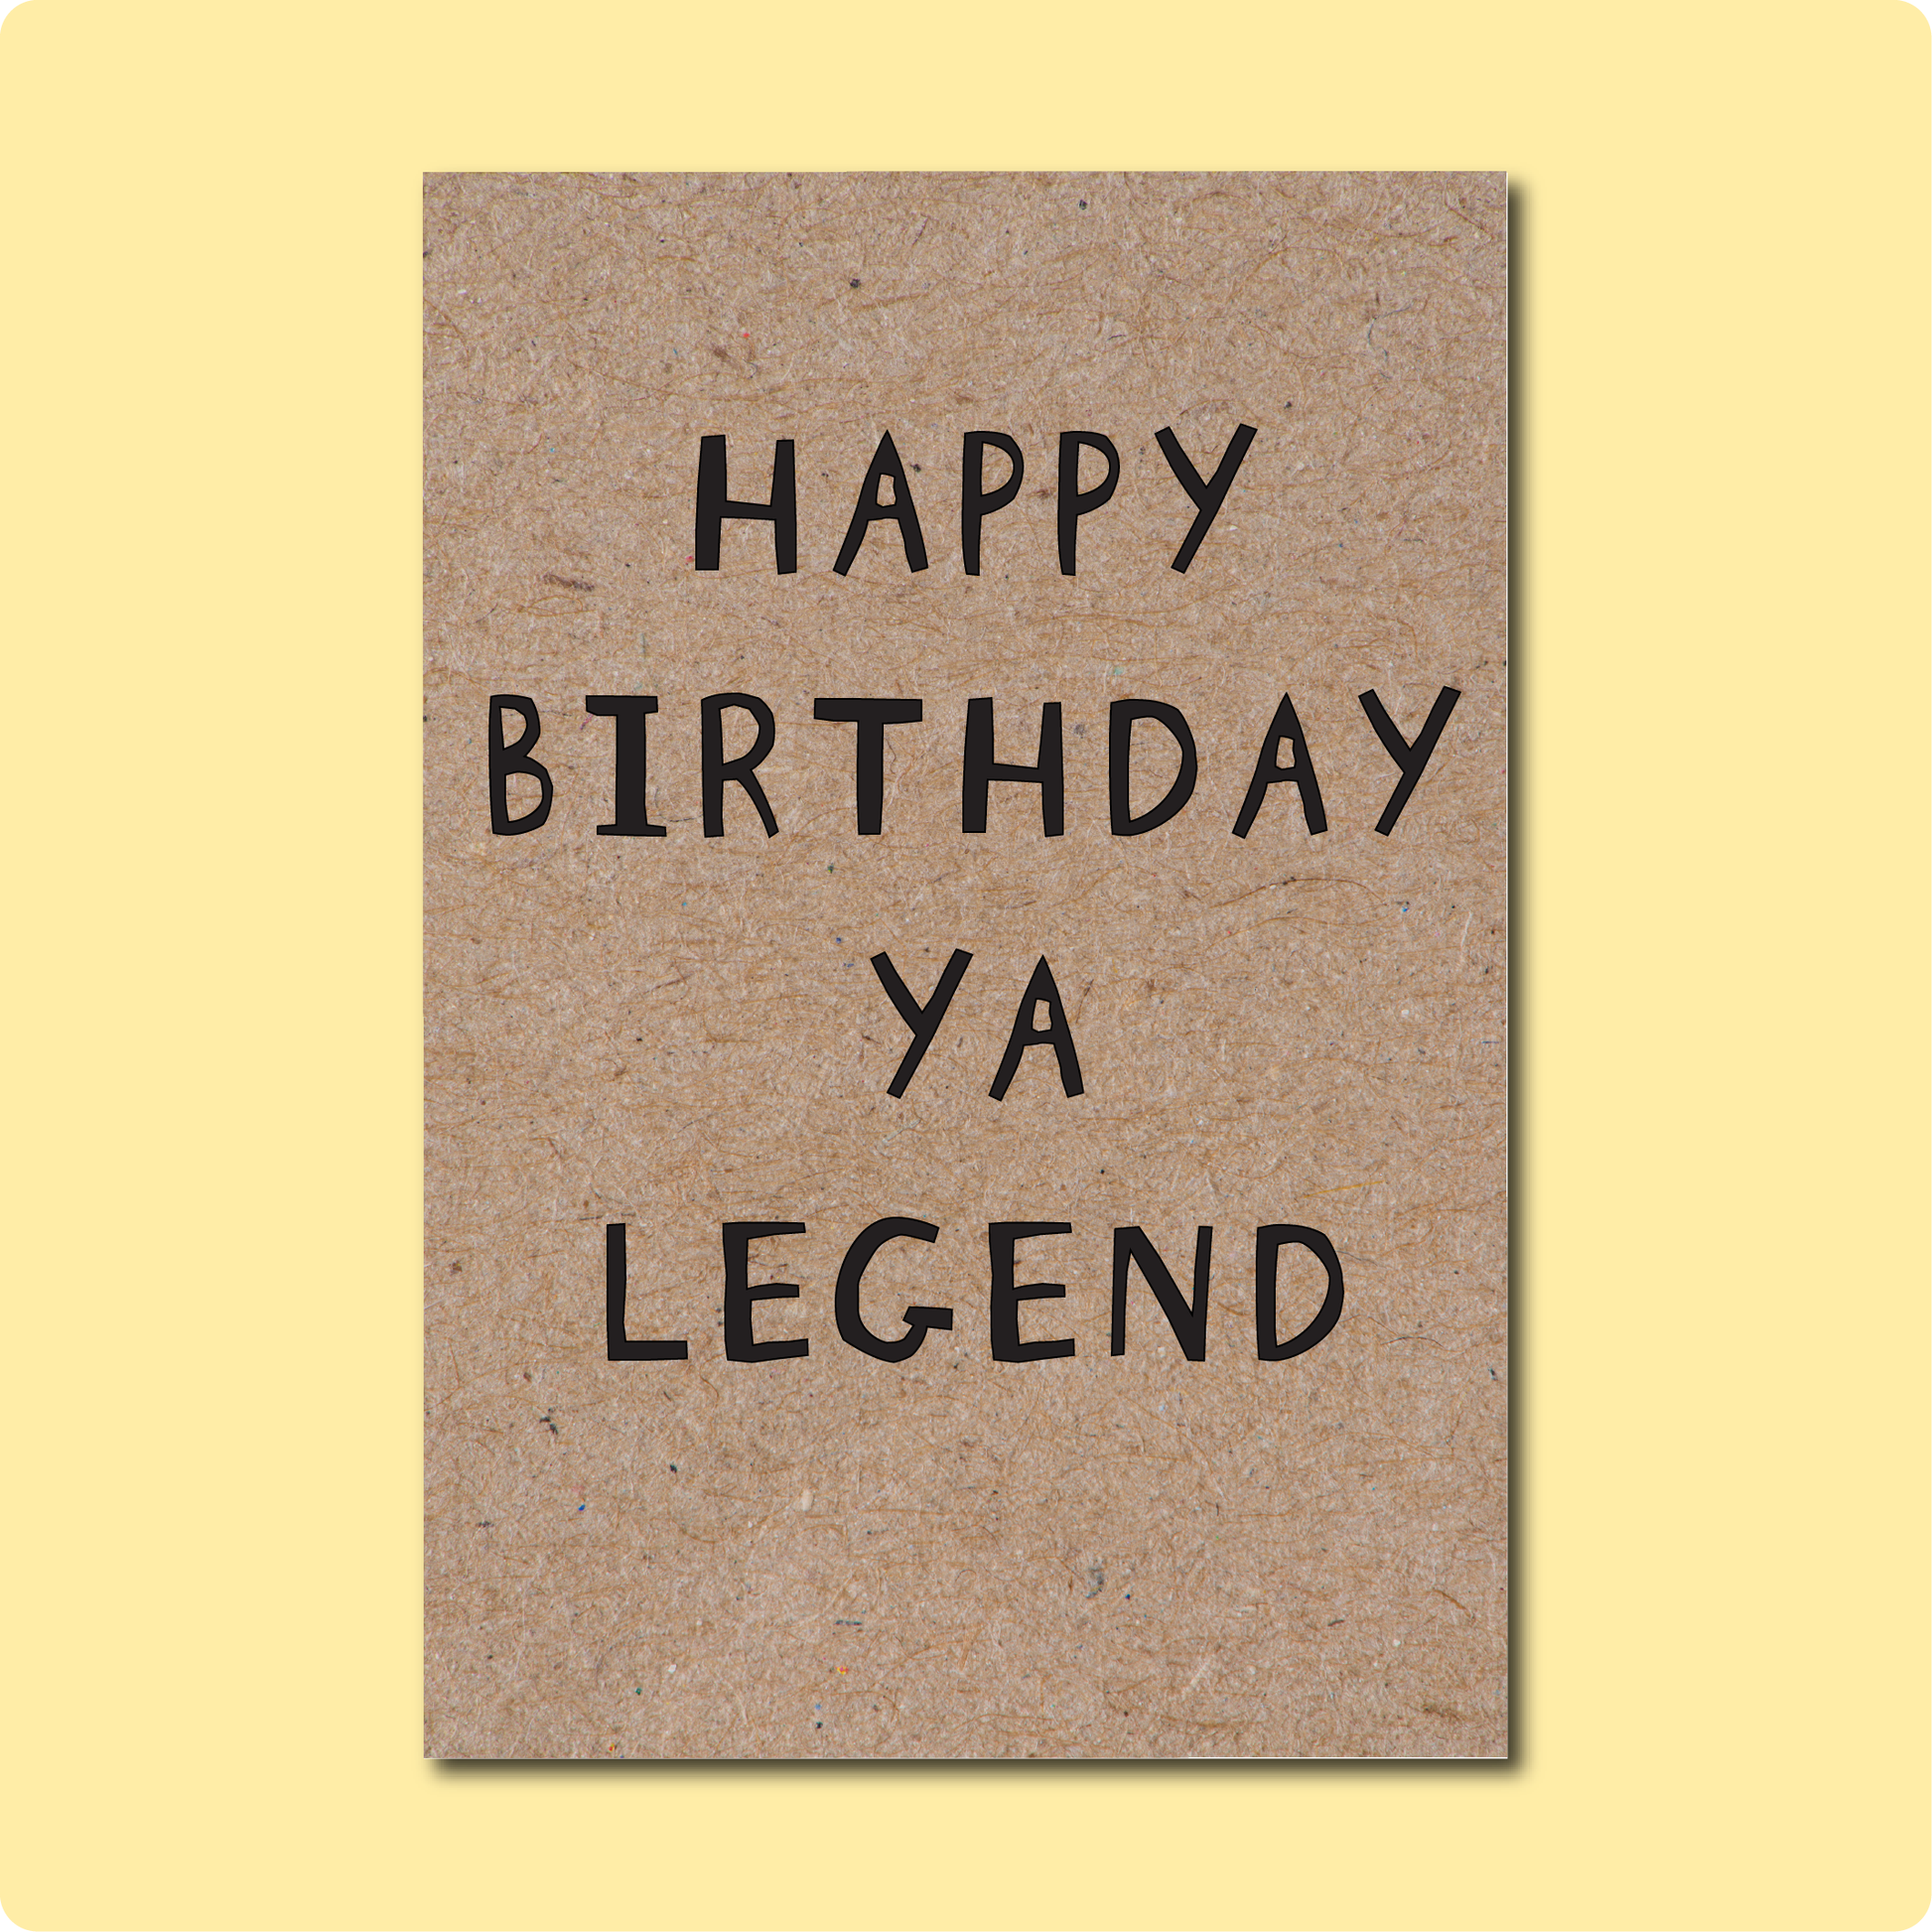 Happy Birthday Ya Legend on black font and printed on recycled kraft card. 